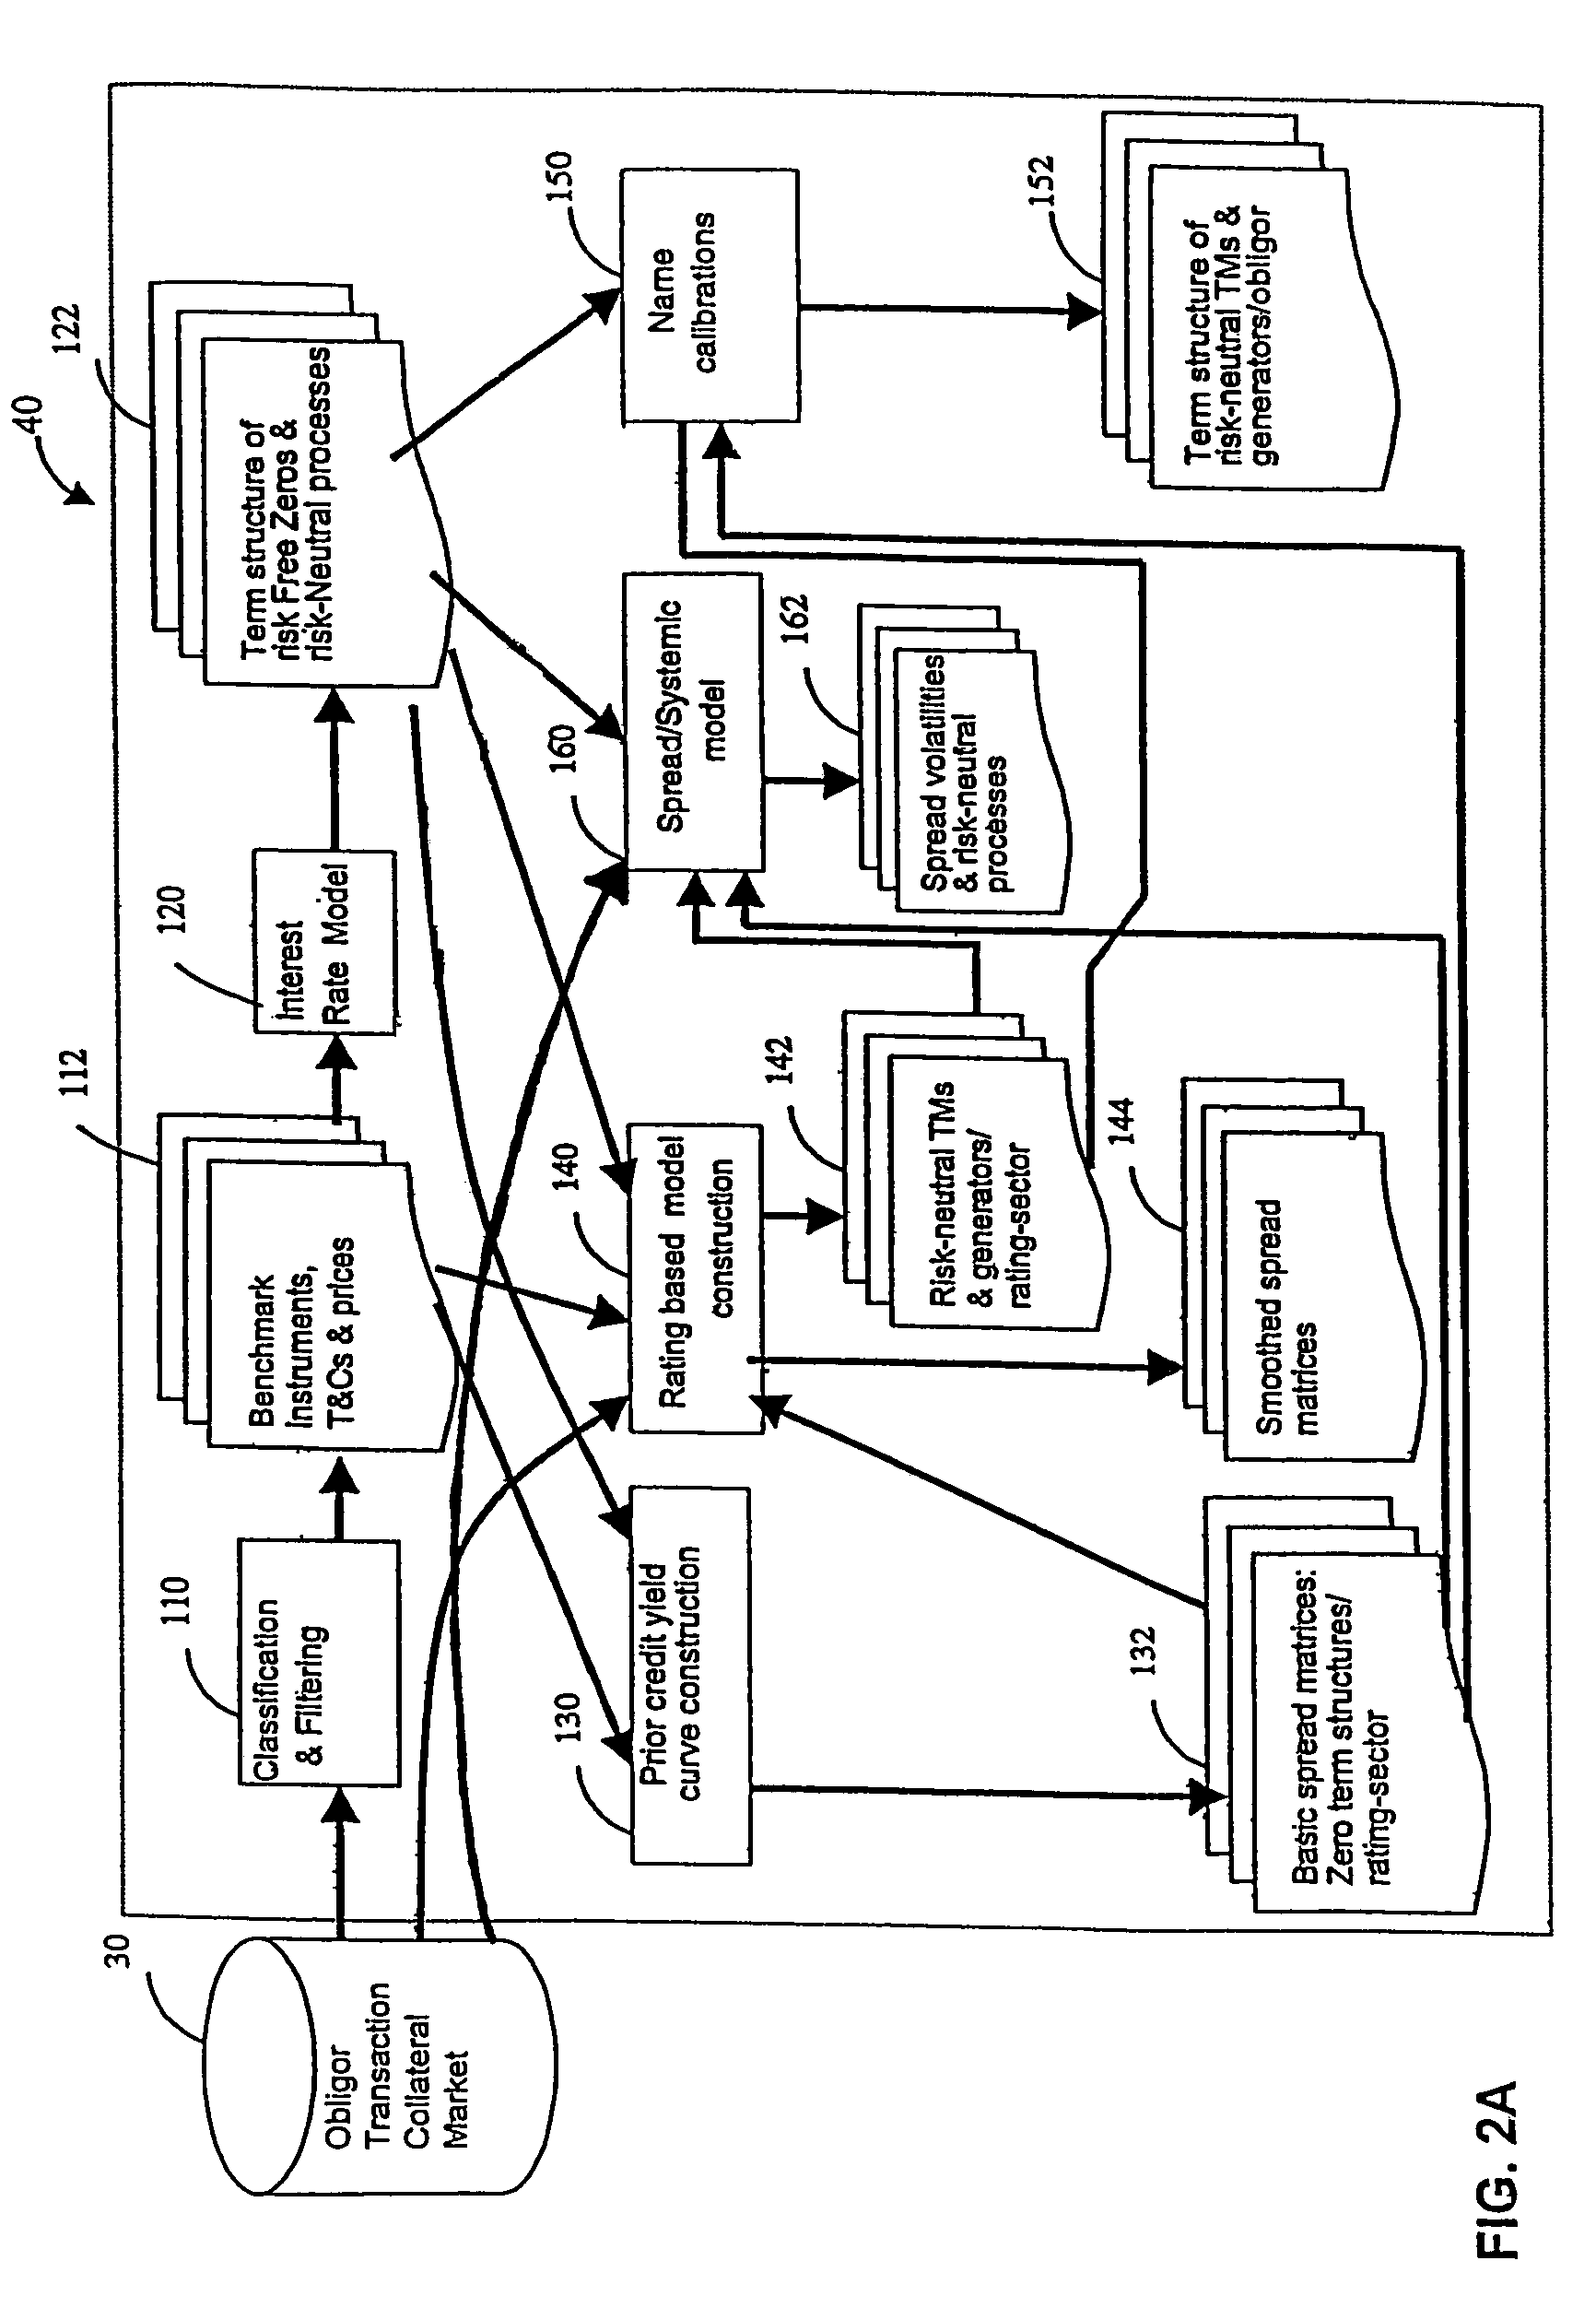 System and methods for valuing and managing the risk of credit instrument portfolios